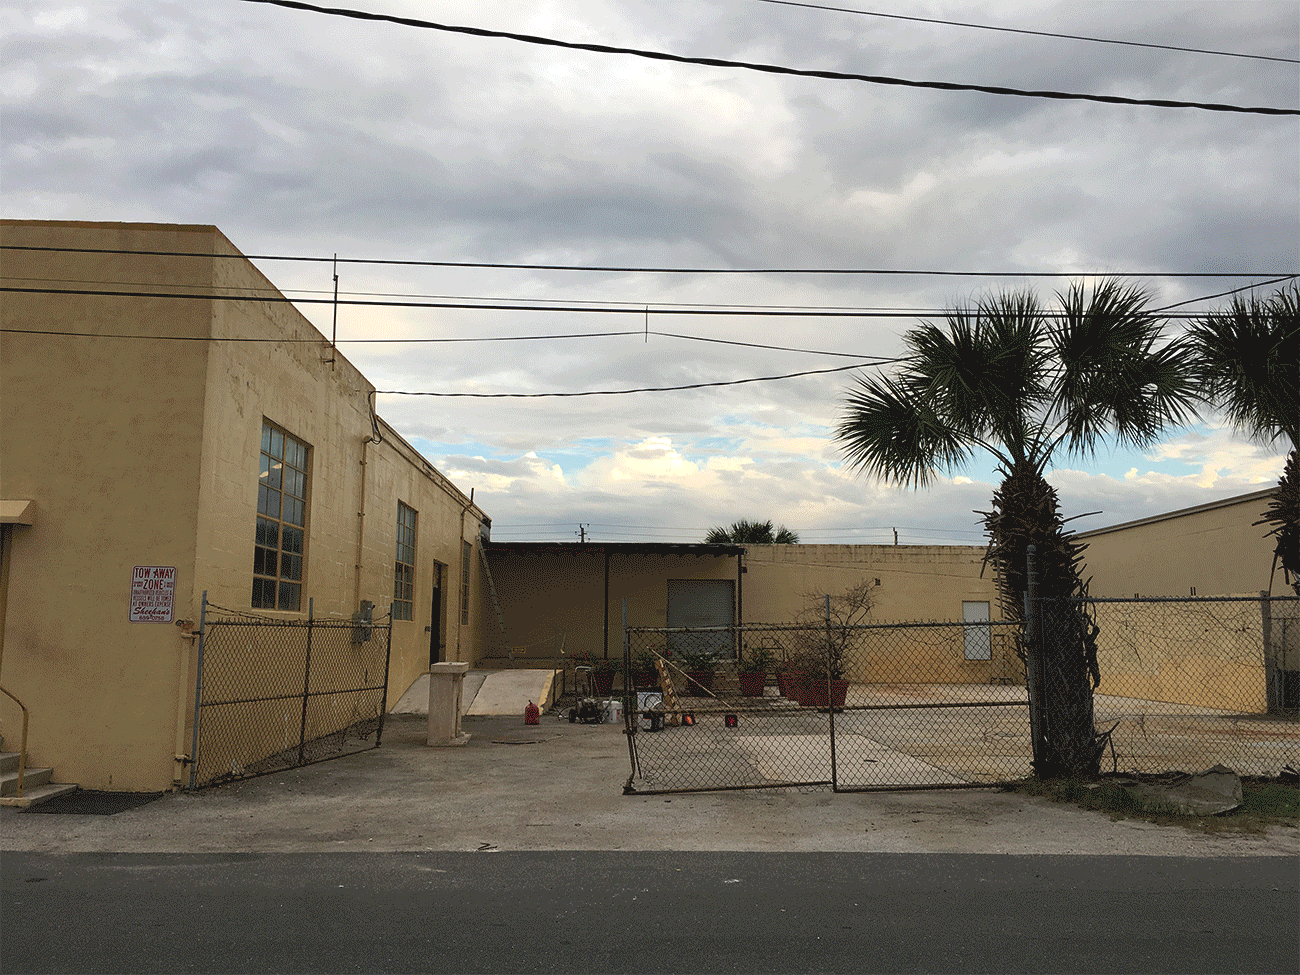 Run down looking yellow warehouse with a chain link fence and empty courtyard in West Palm Beach Florida